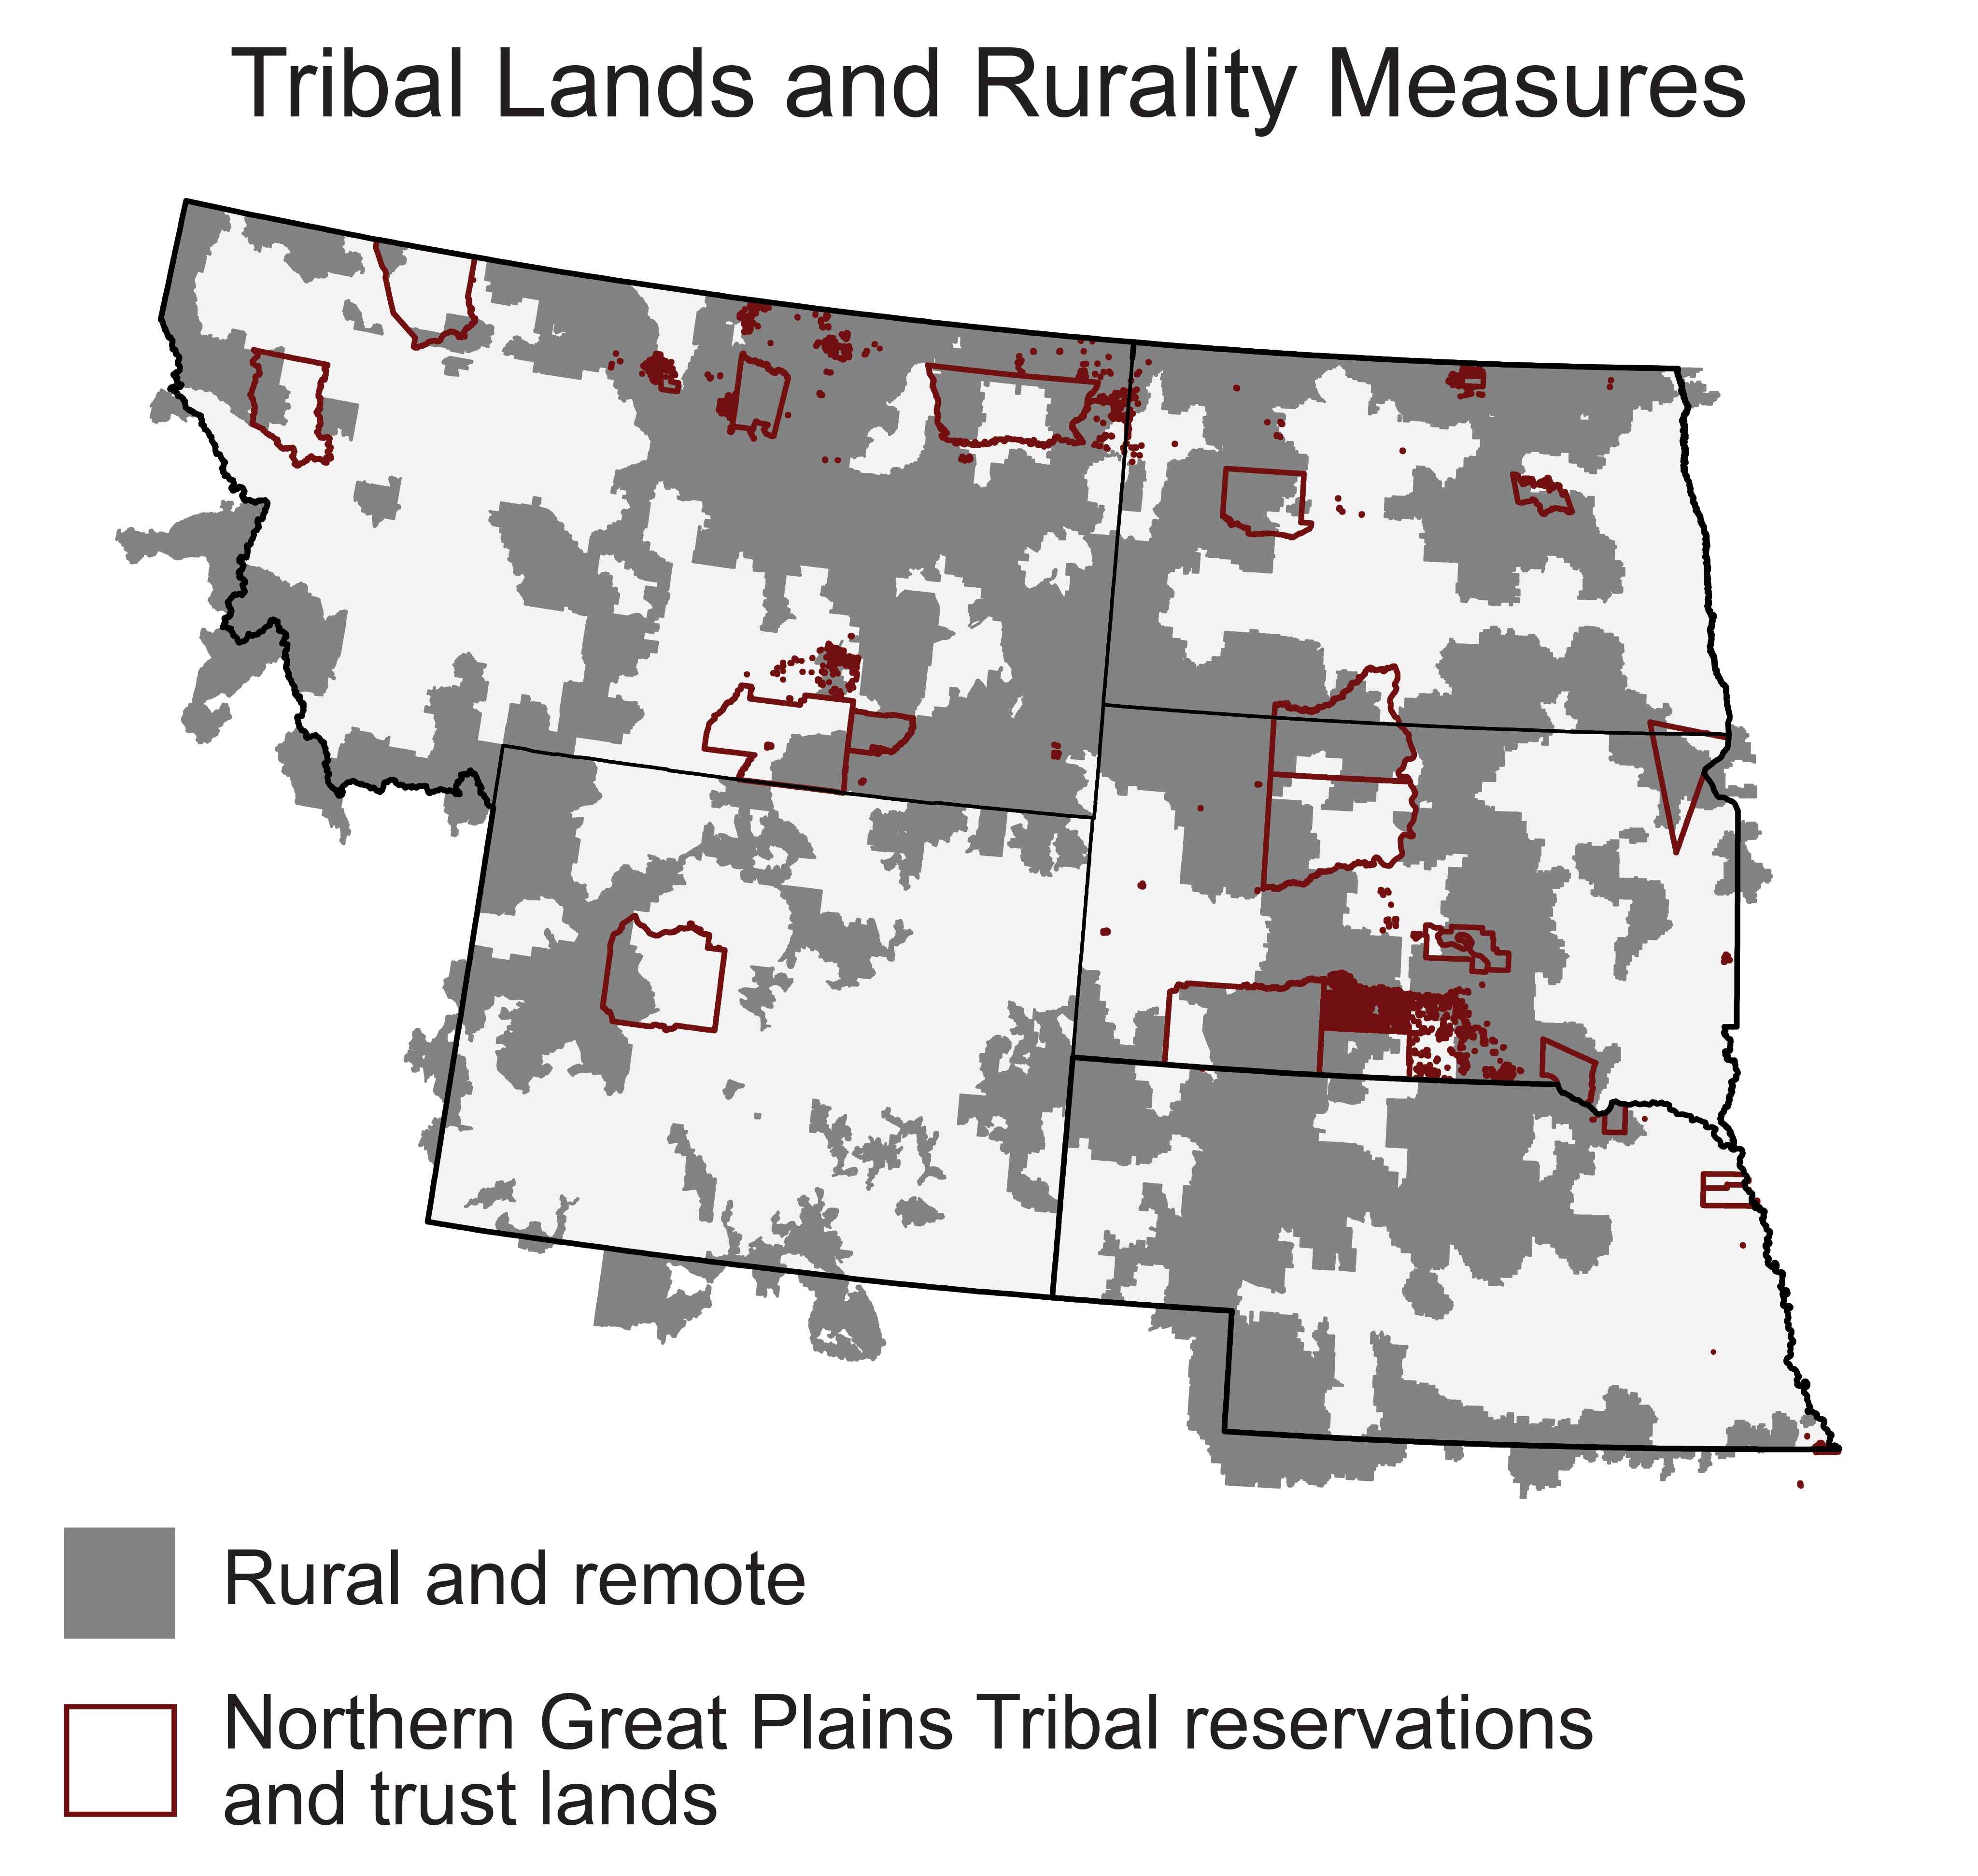 Tribal Lands and Rurality Measures